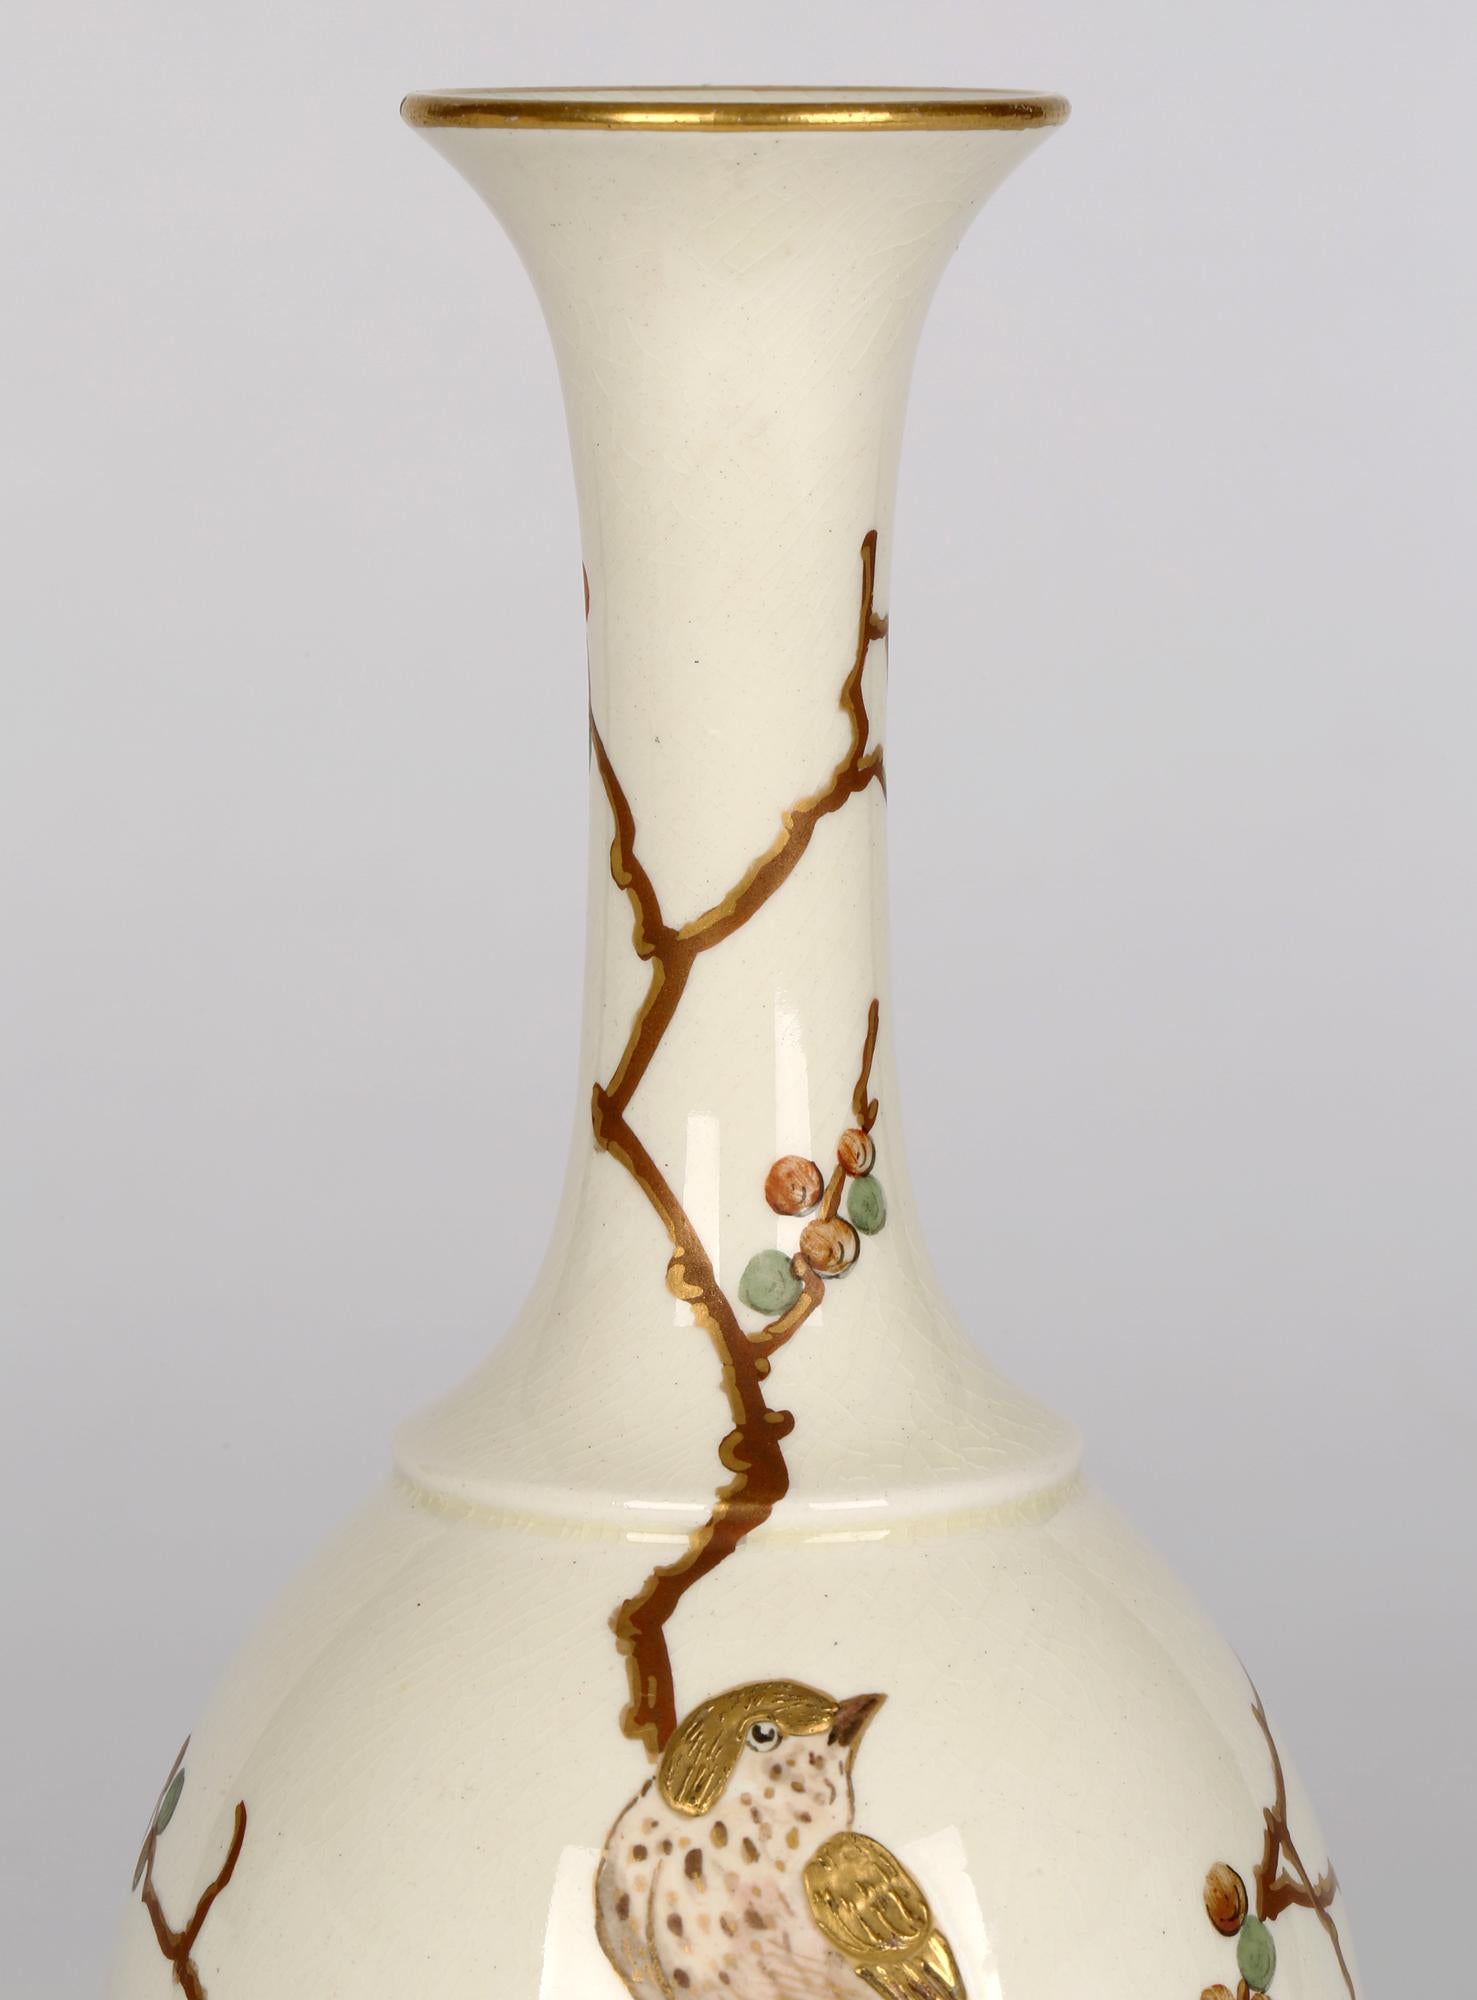 A very fine and rare Aesthetic Movement vase hand painted with bird perched amidst foliage in the Japonesque taste by Wedgwood and dating from around 1875. This finely made ceramic vase is of bottle shape with a bulbous oval shaped body and tall